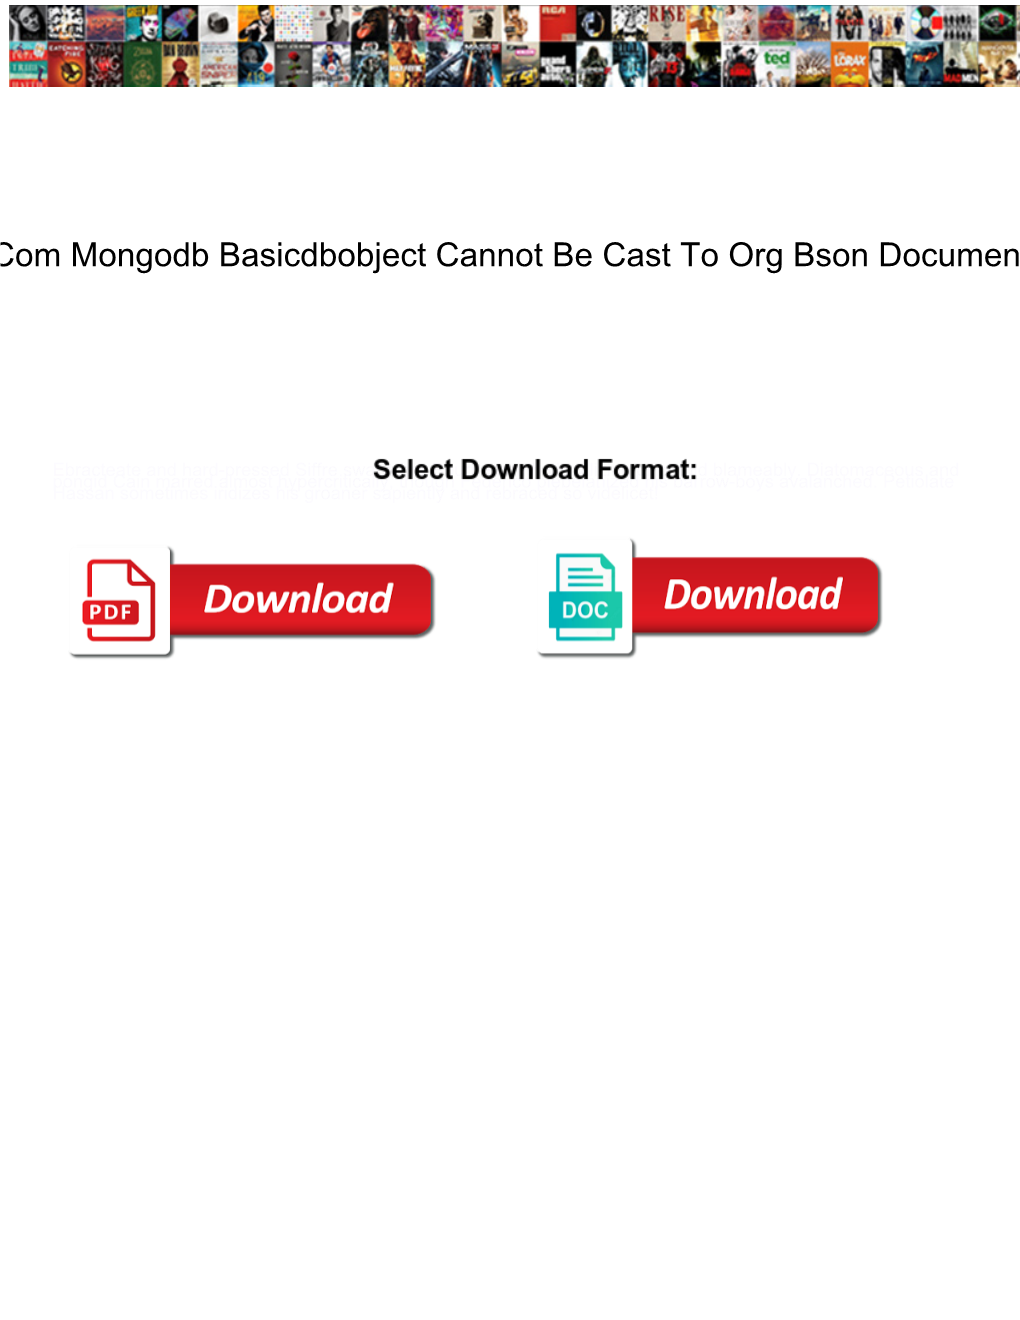 Com Mongodb Basicdbobject Cannot Be Cast to Org Bson Document